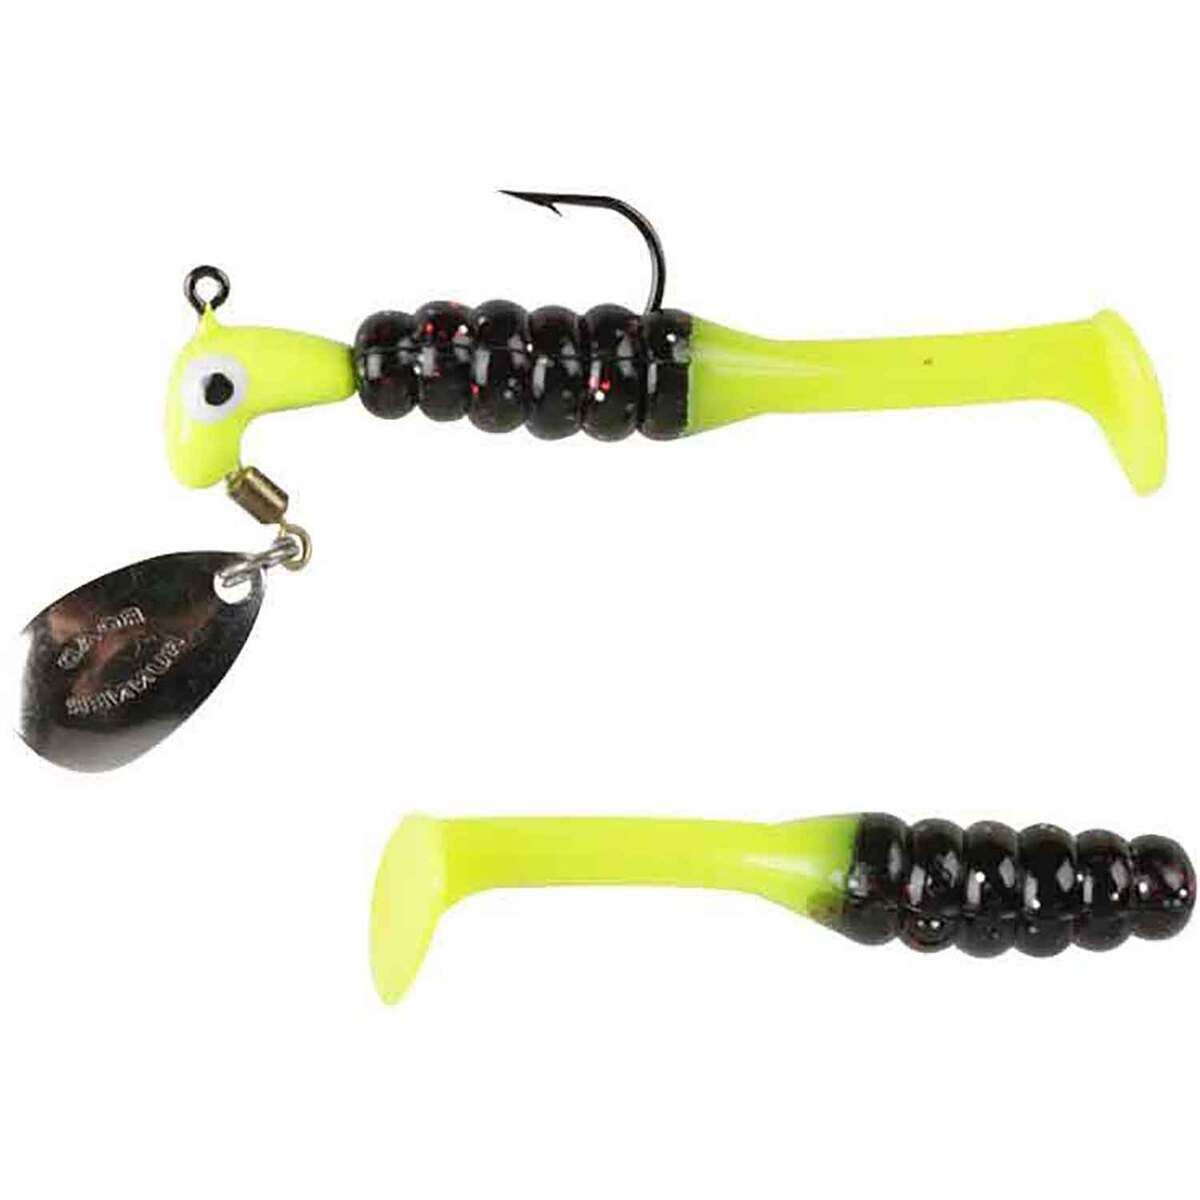 Tadpole crappie baits, Jigs, lures. Black Ice, 15 count.